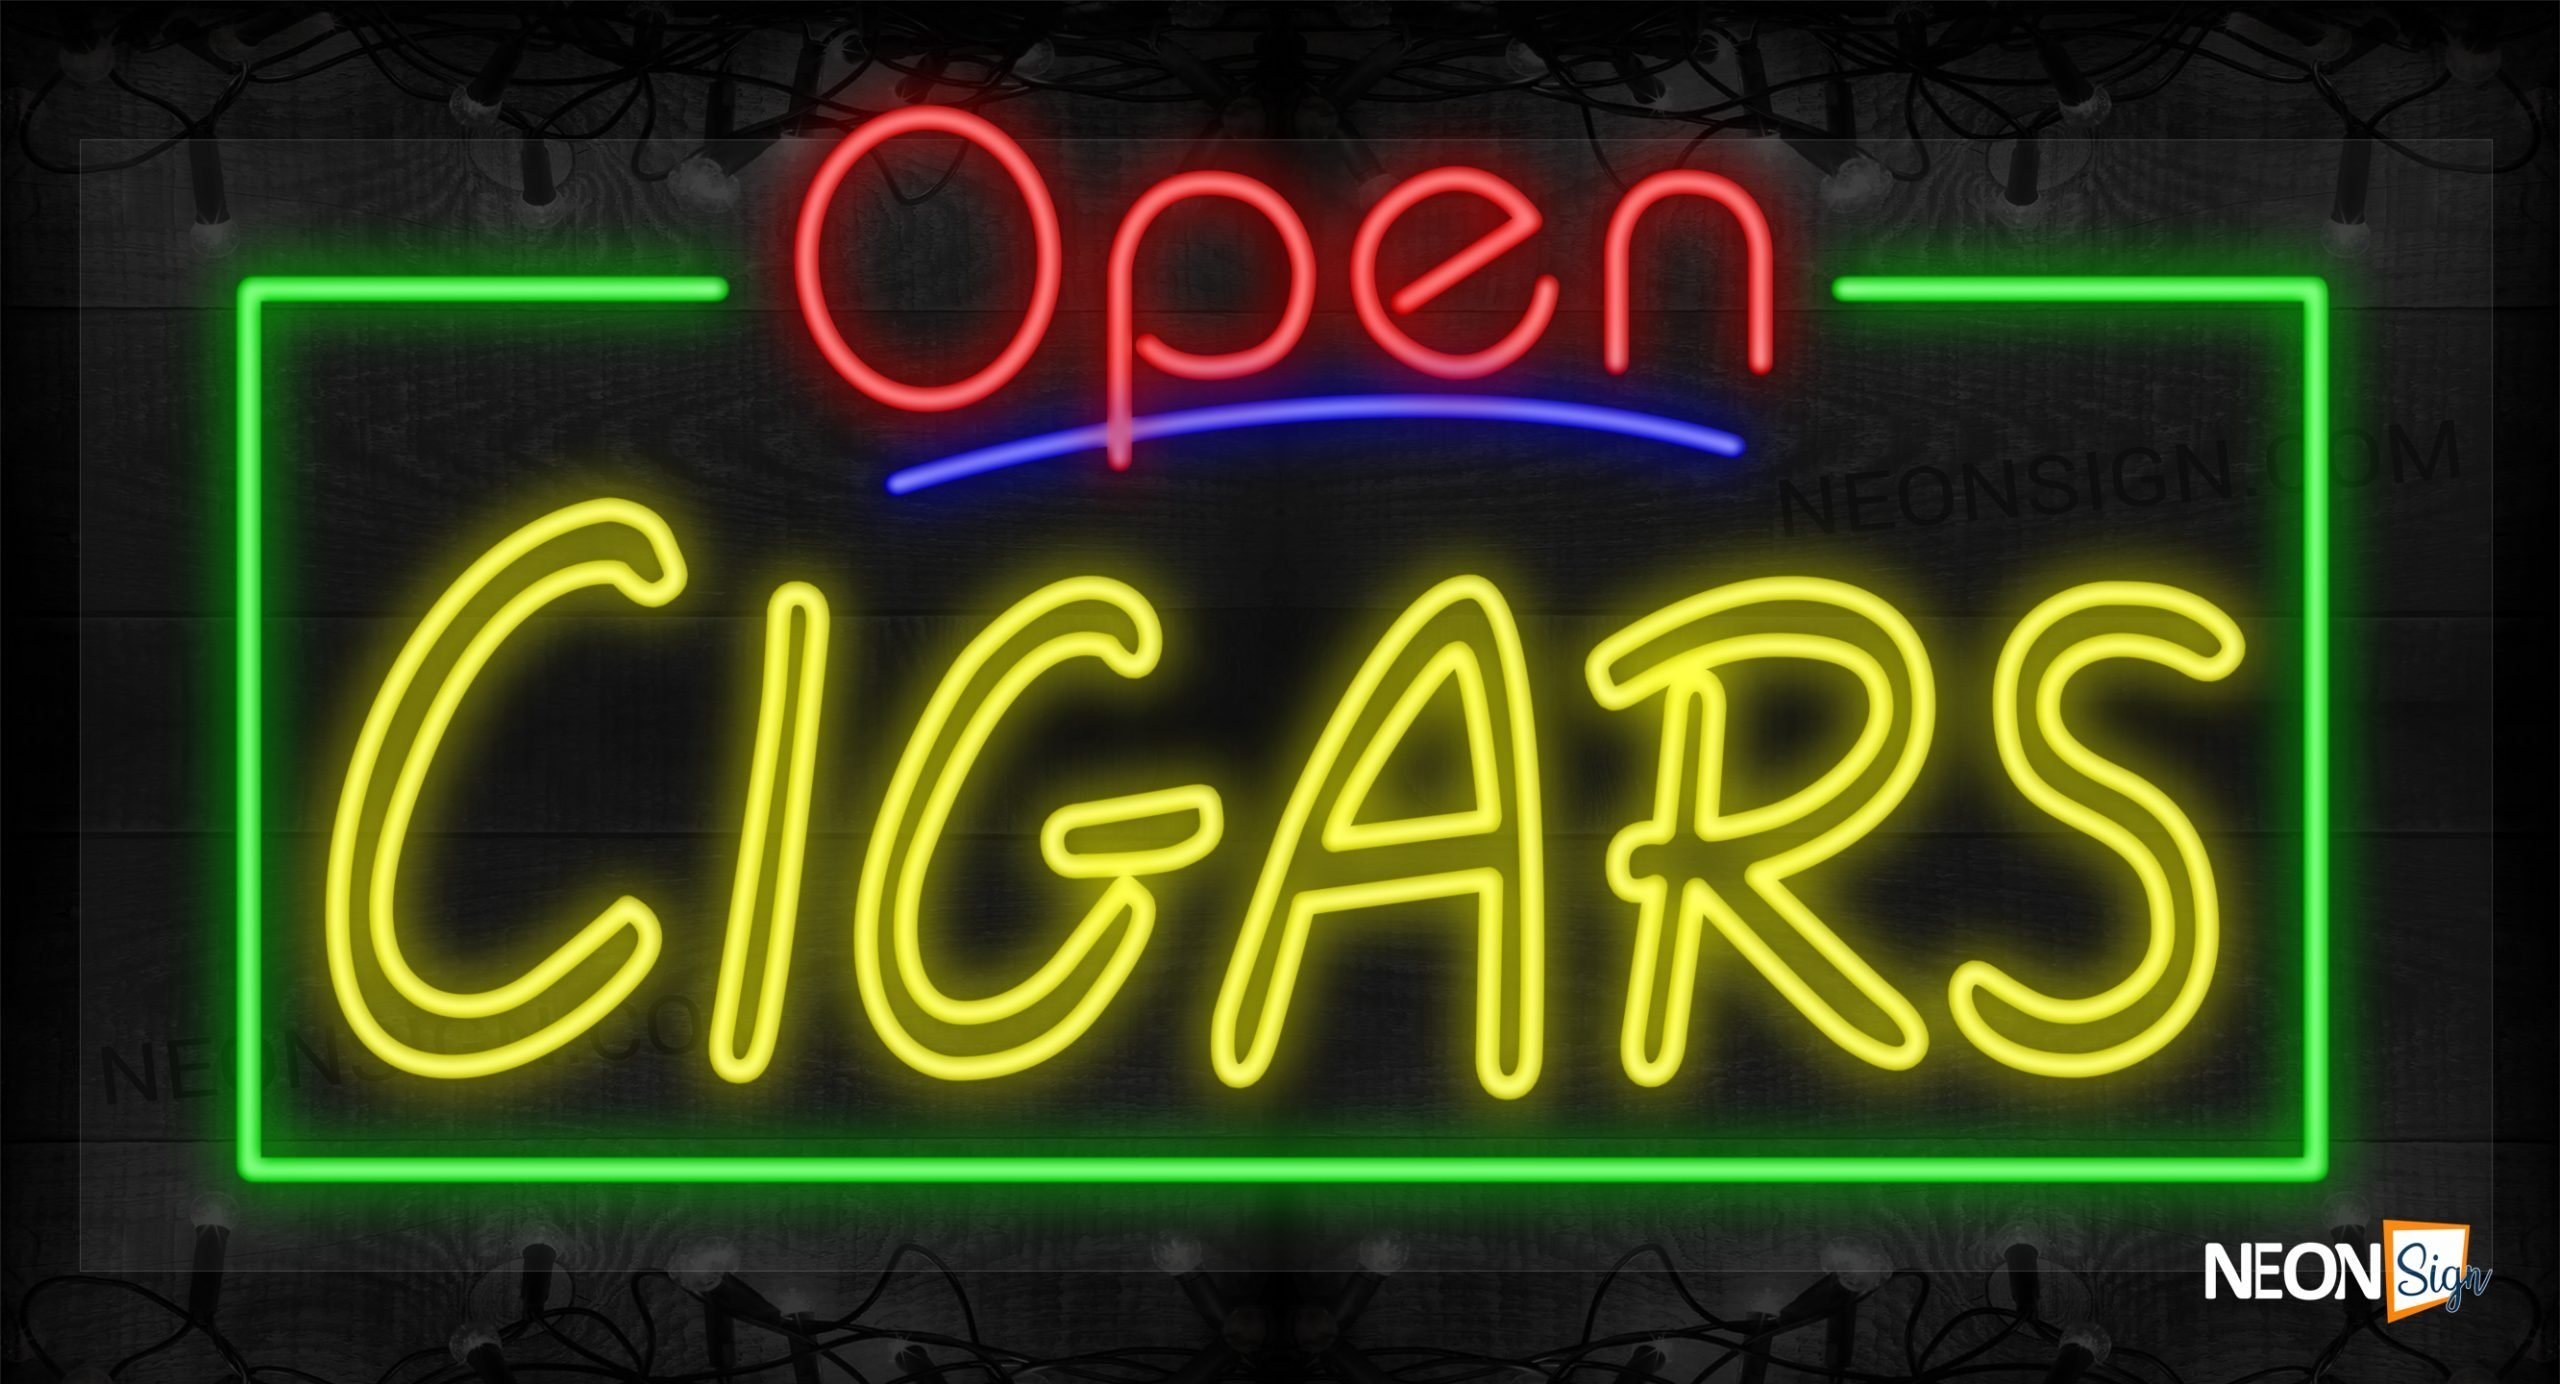 Image of Open Cigars (Double-Stroke) with Green Border LED Flex